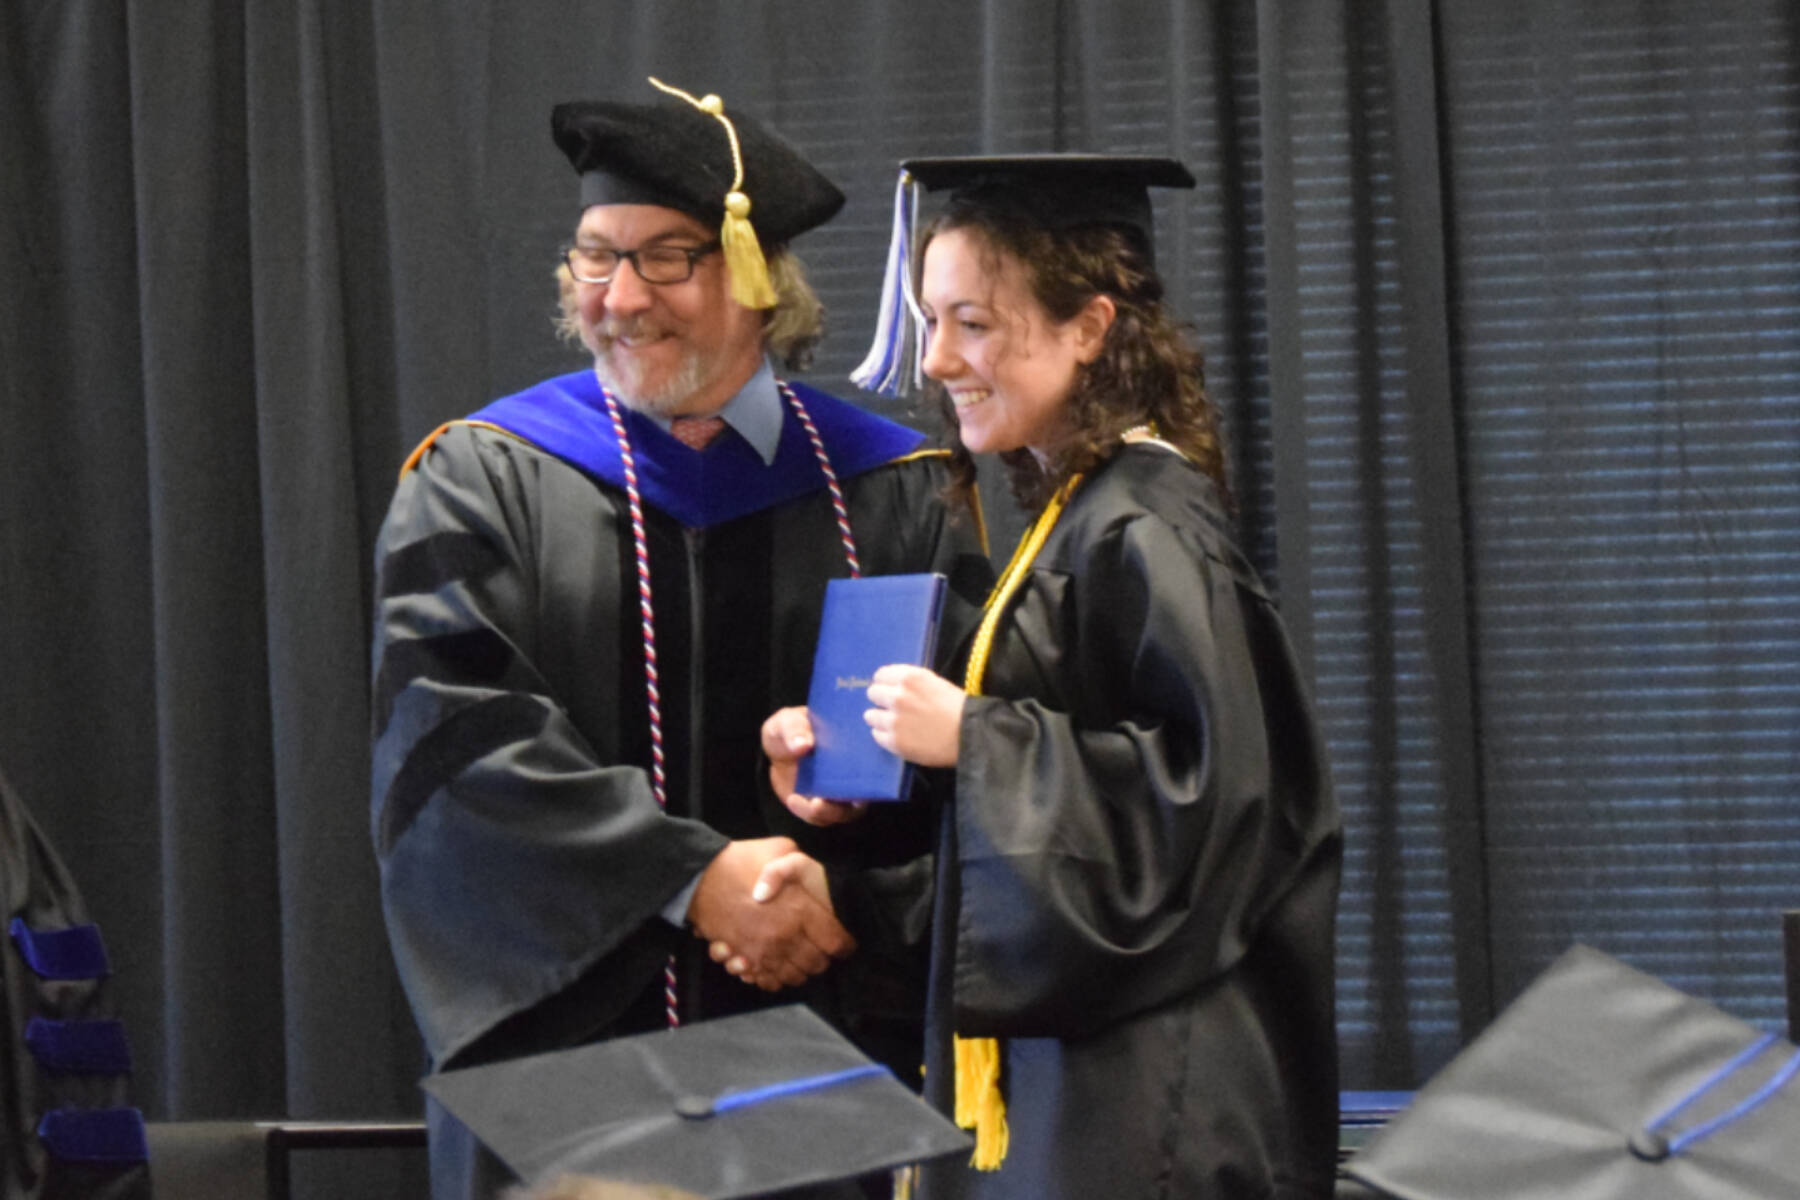 Kachemak Bay Campus Director Dr. Reid Brewer (left) presents valedictorian Elizabeth Rozeboom (right) with her Associate of Arts diploma during the 2023 KBC Commencement on Wednesday, May 10, 2023, in Homer, Alaska. (Photo by Delcenia Cosman/Homer News)